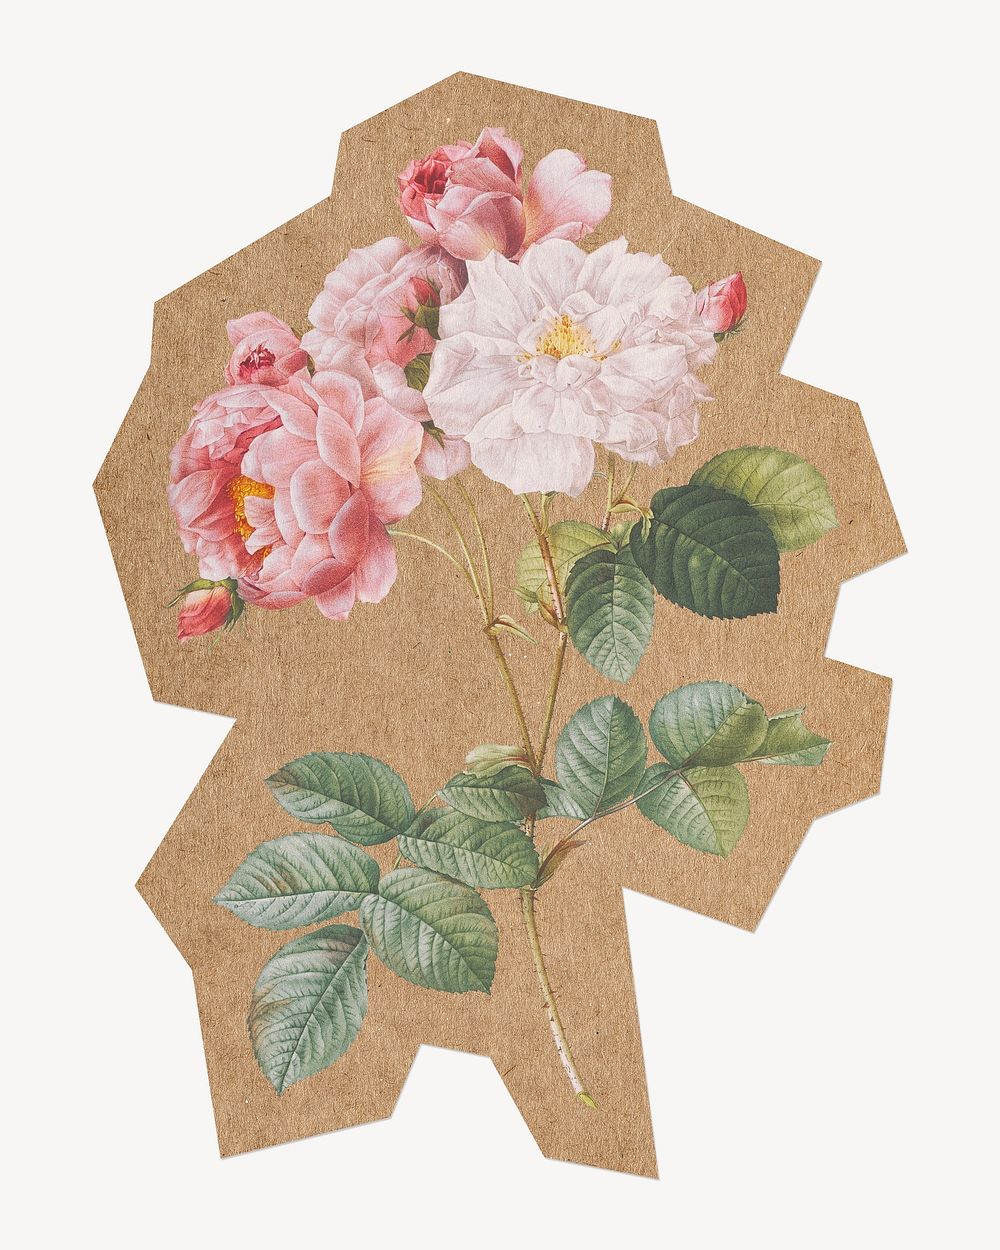 Blooming pink rosebush, cut out paper element. Artwork from Pierre Joseph Redouté remixed by rawpixel.